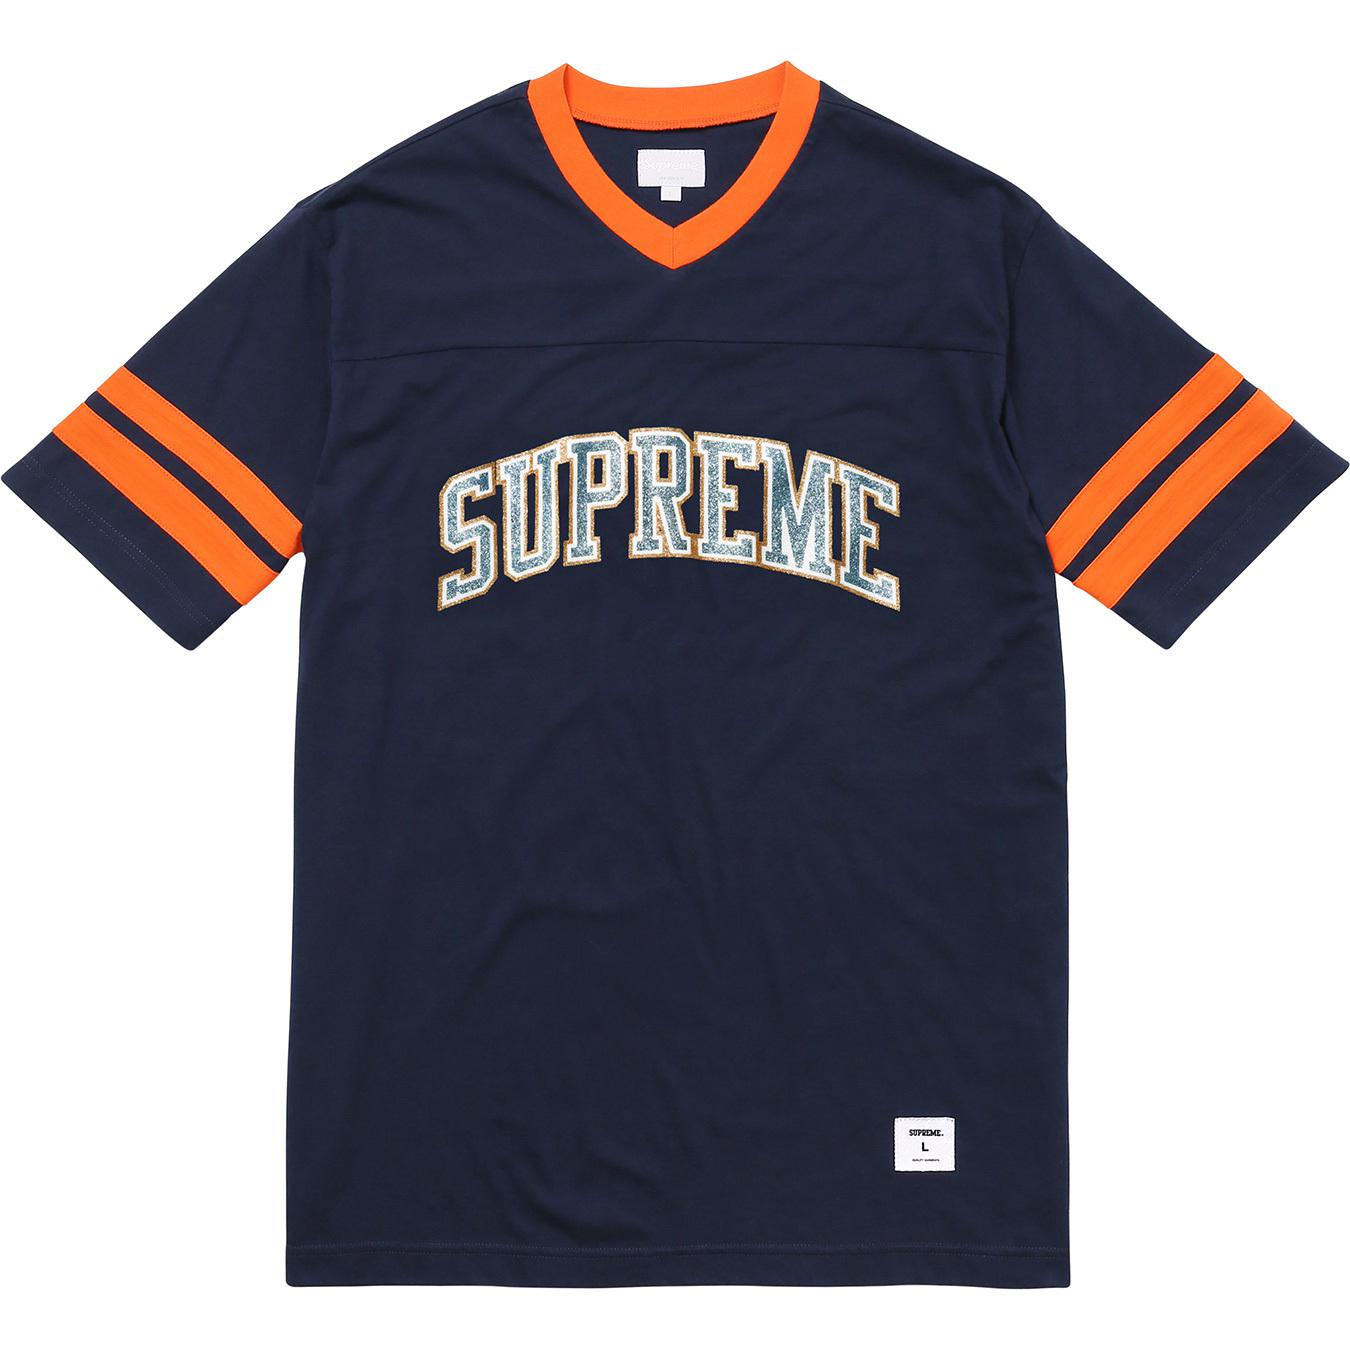 Supreme Glitter Arc Football Top Navy in Blue for Men - Lyst